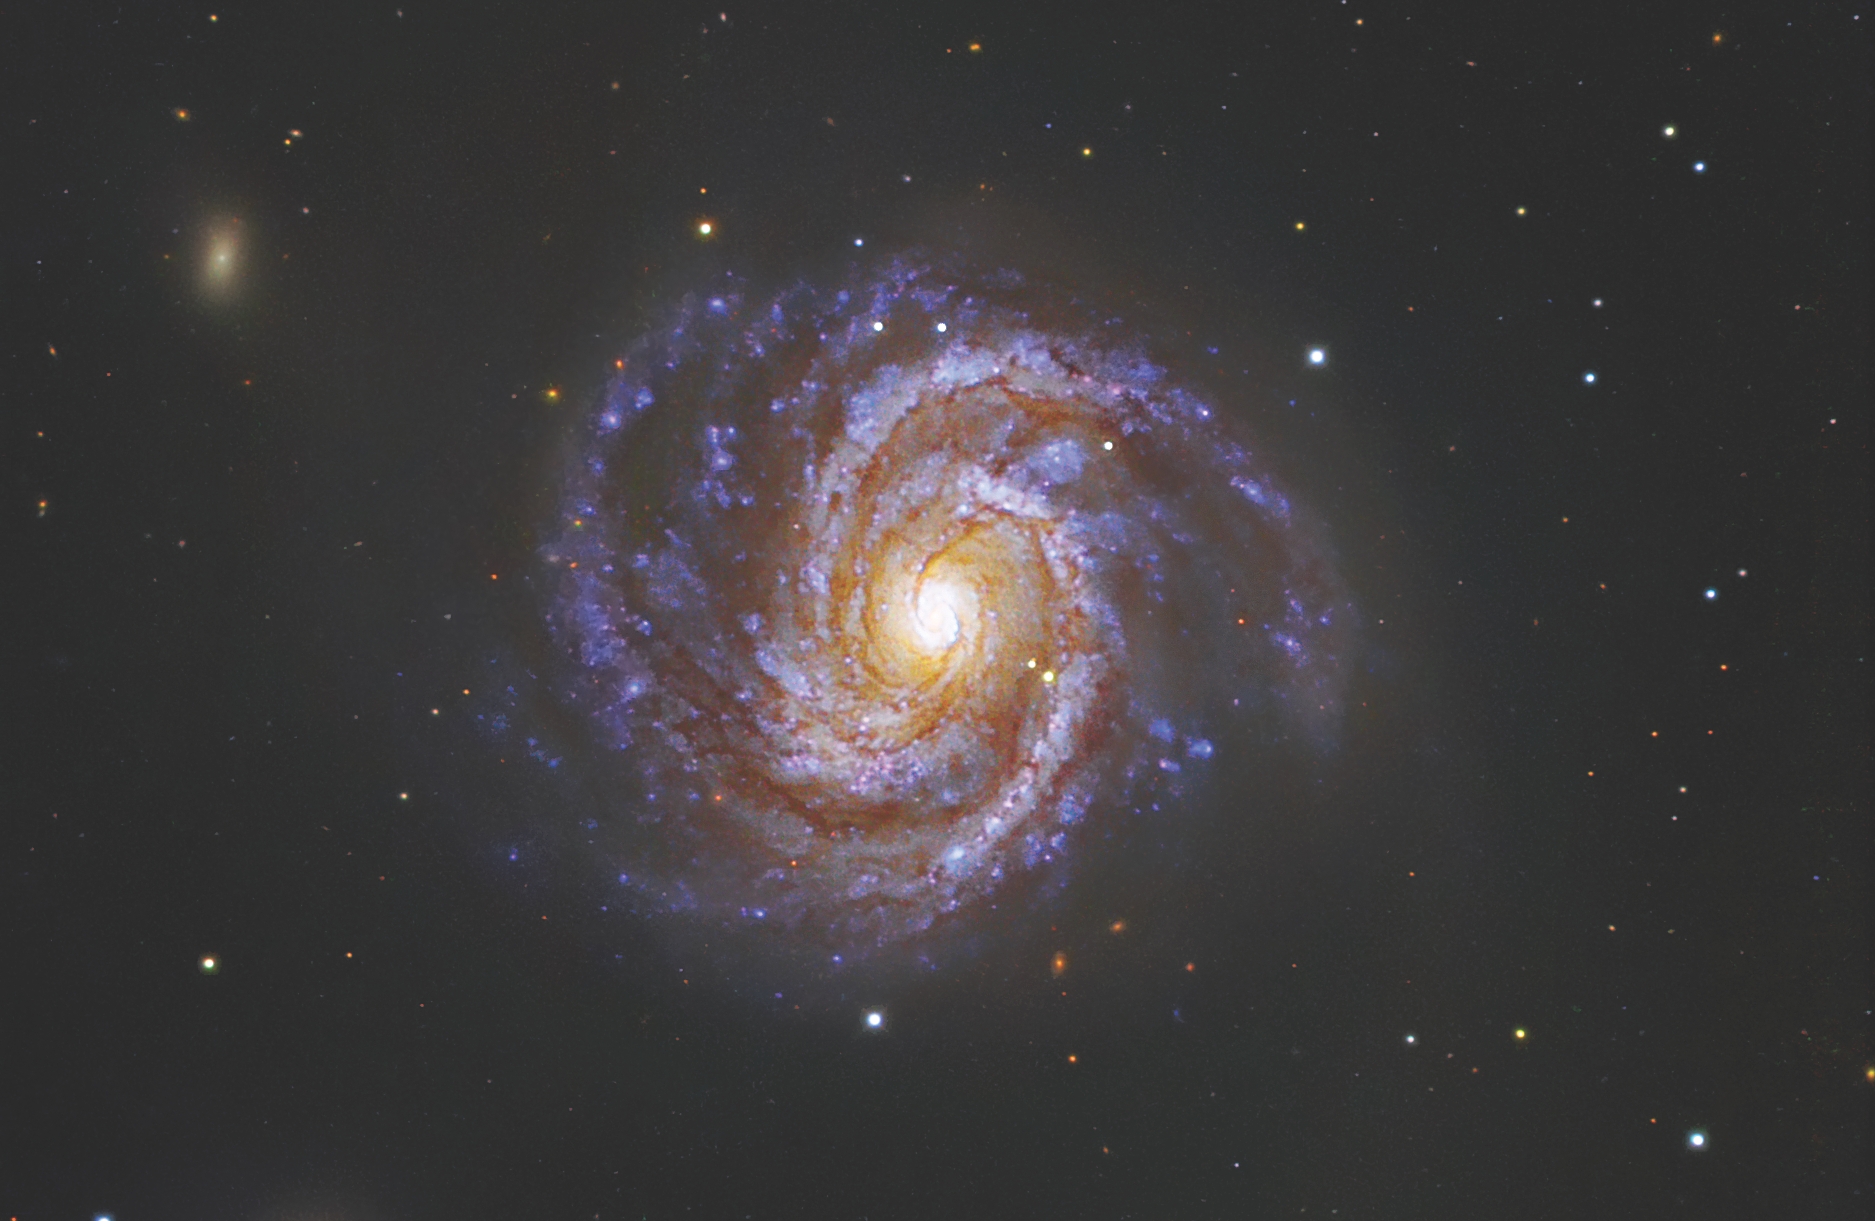 Why do galaxies spin? |